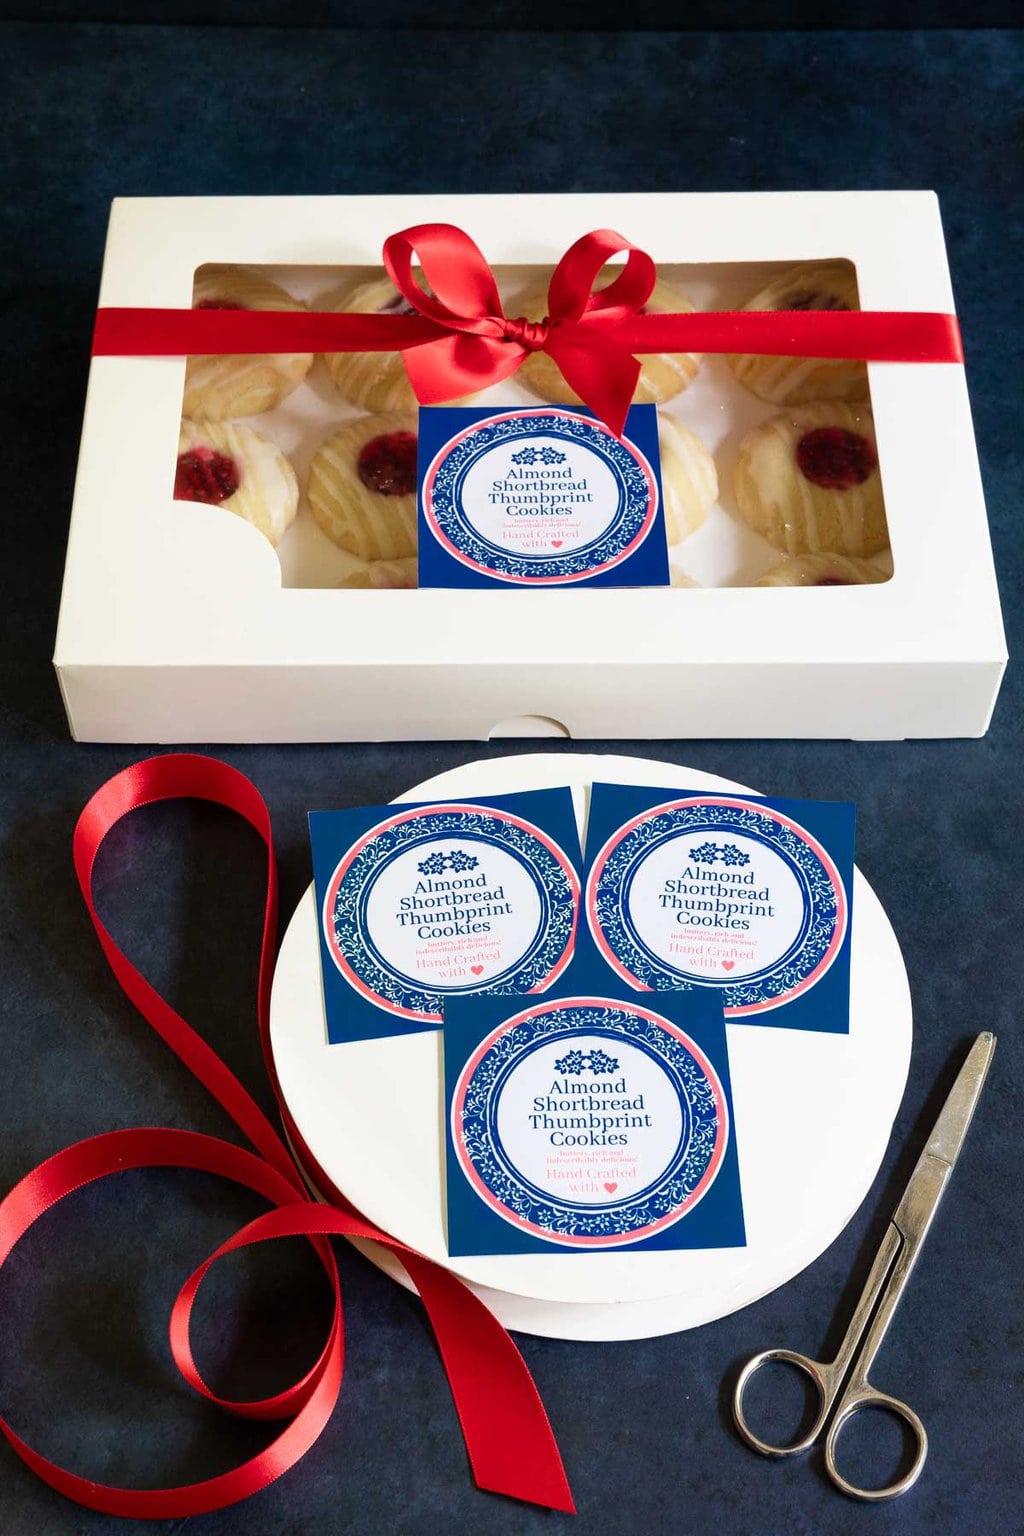 Vertical photo of Almond Shortbread Thumbprints cookies with custom labels for gift giving.